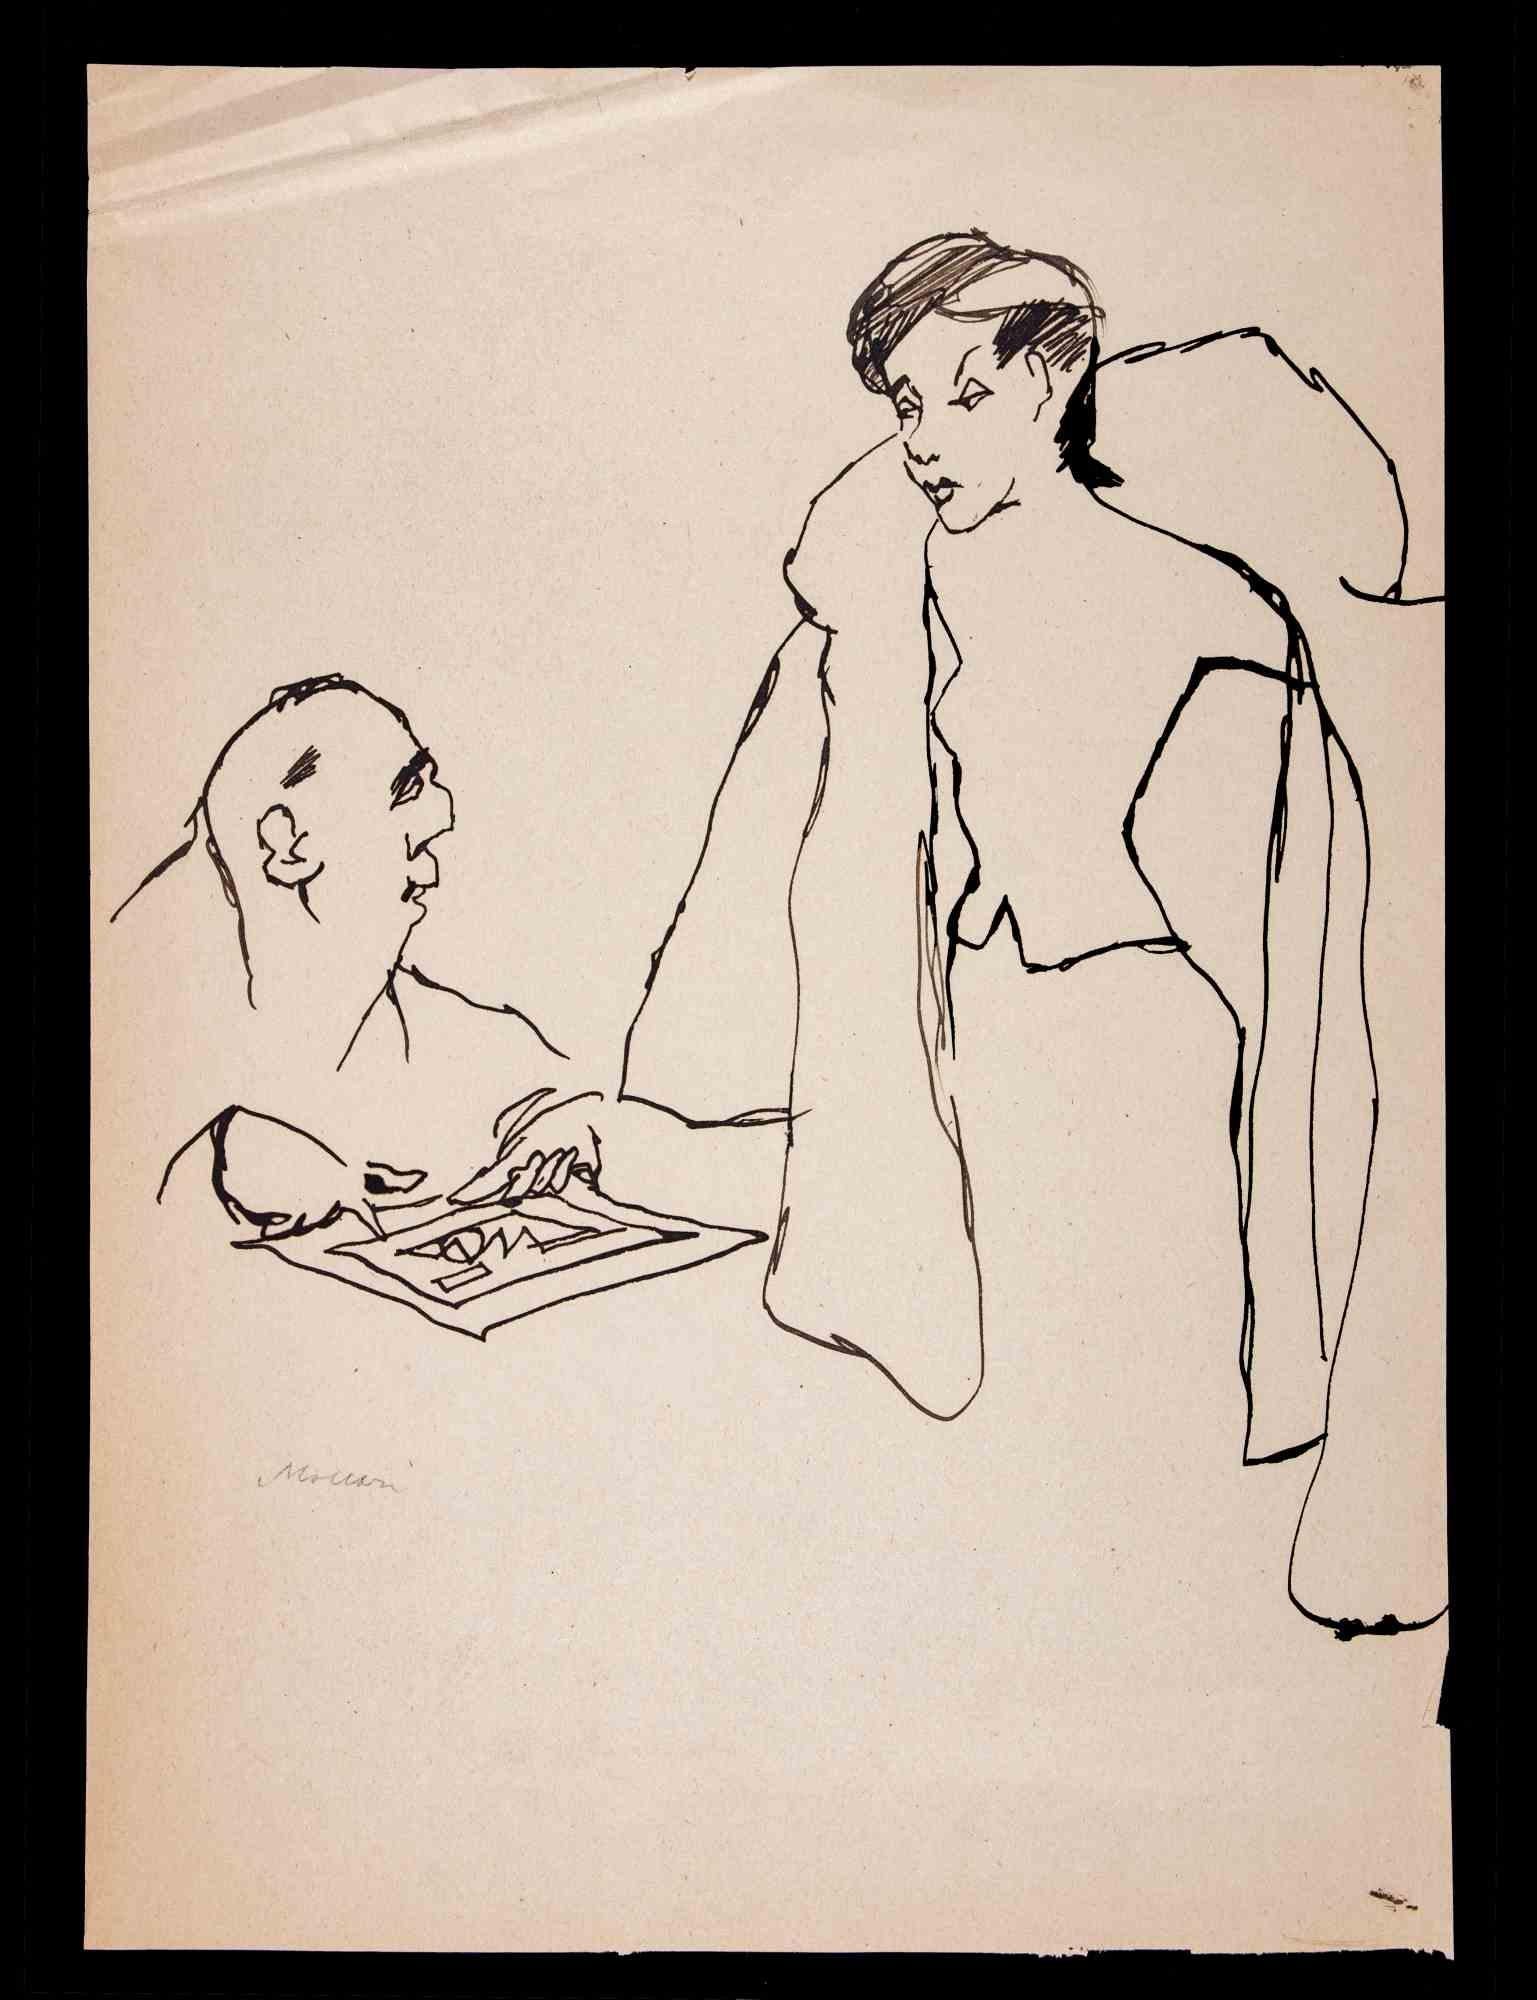 The Visit is a Pen Drawing realized by Mino Maccari (1924-1989) in 1965.

Hand signed on the lower margin.

Good condition on a yellowed paper.

Mino Maccari (Siena, 1924-Rome, June 16, 1989) was an Italian writer, painter, engraver and journalist,